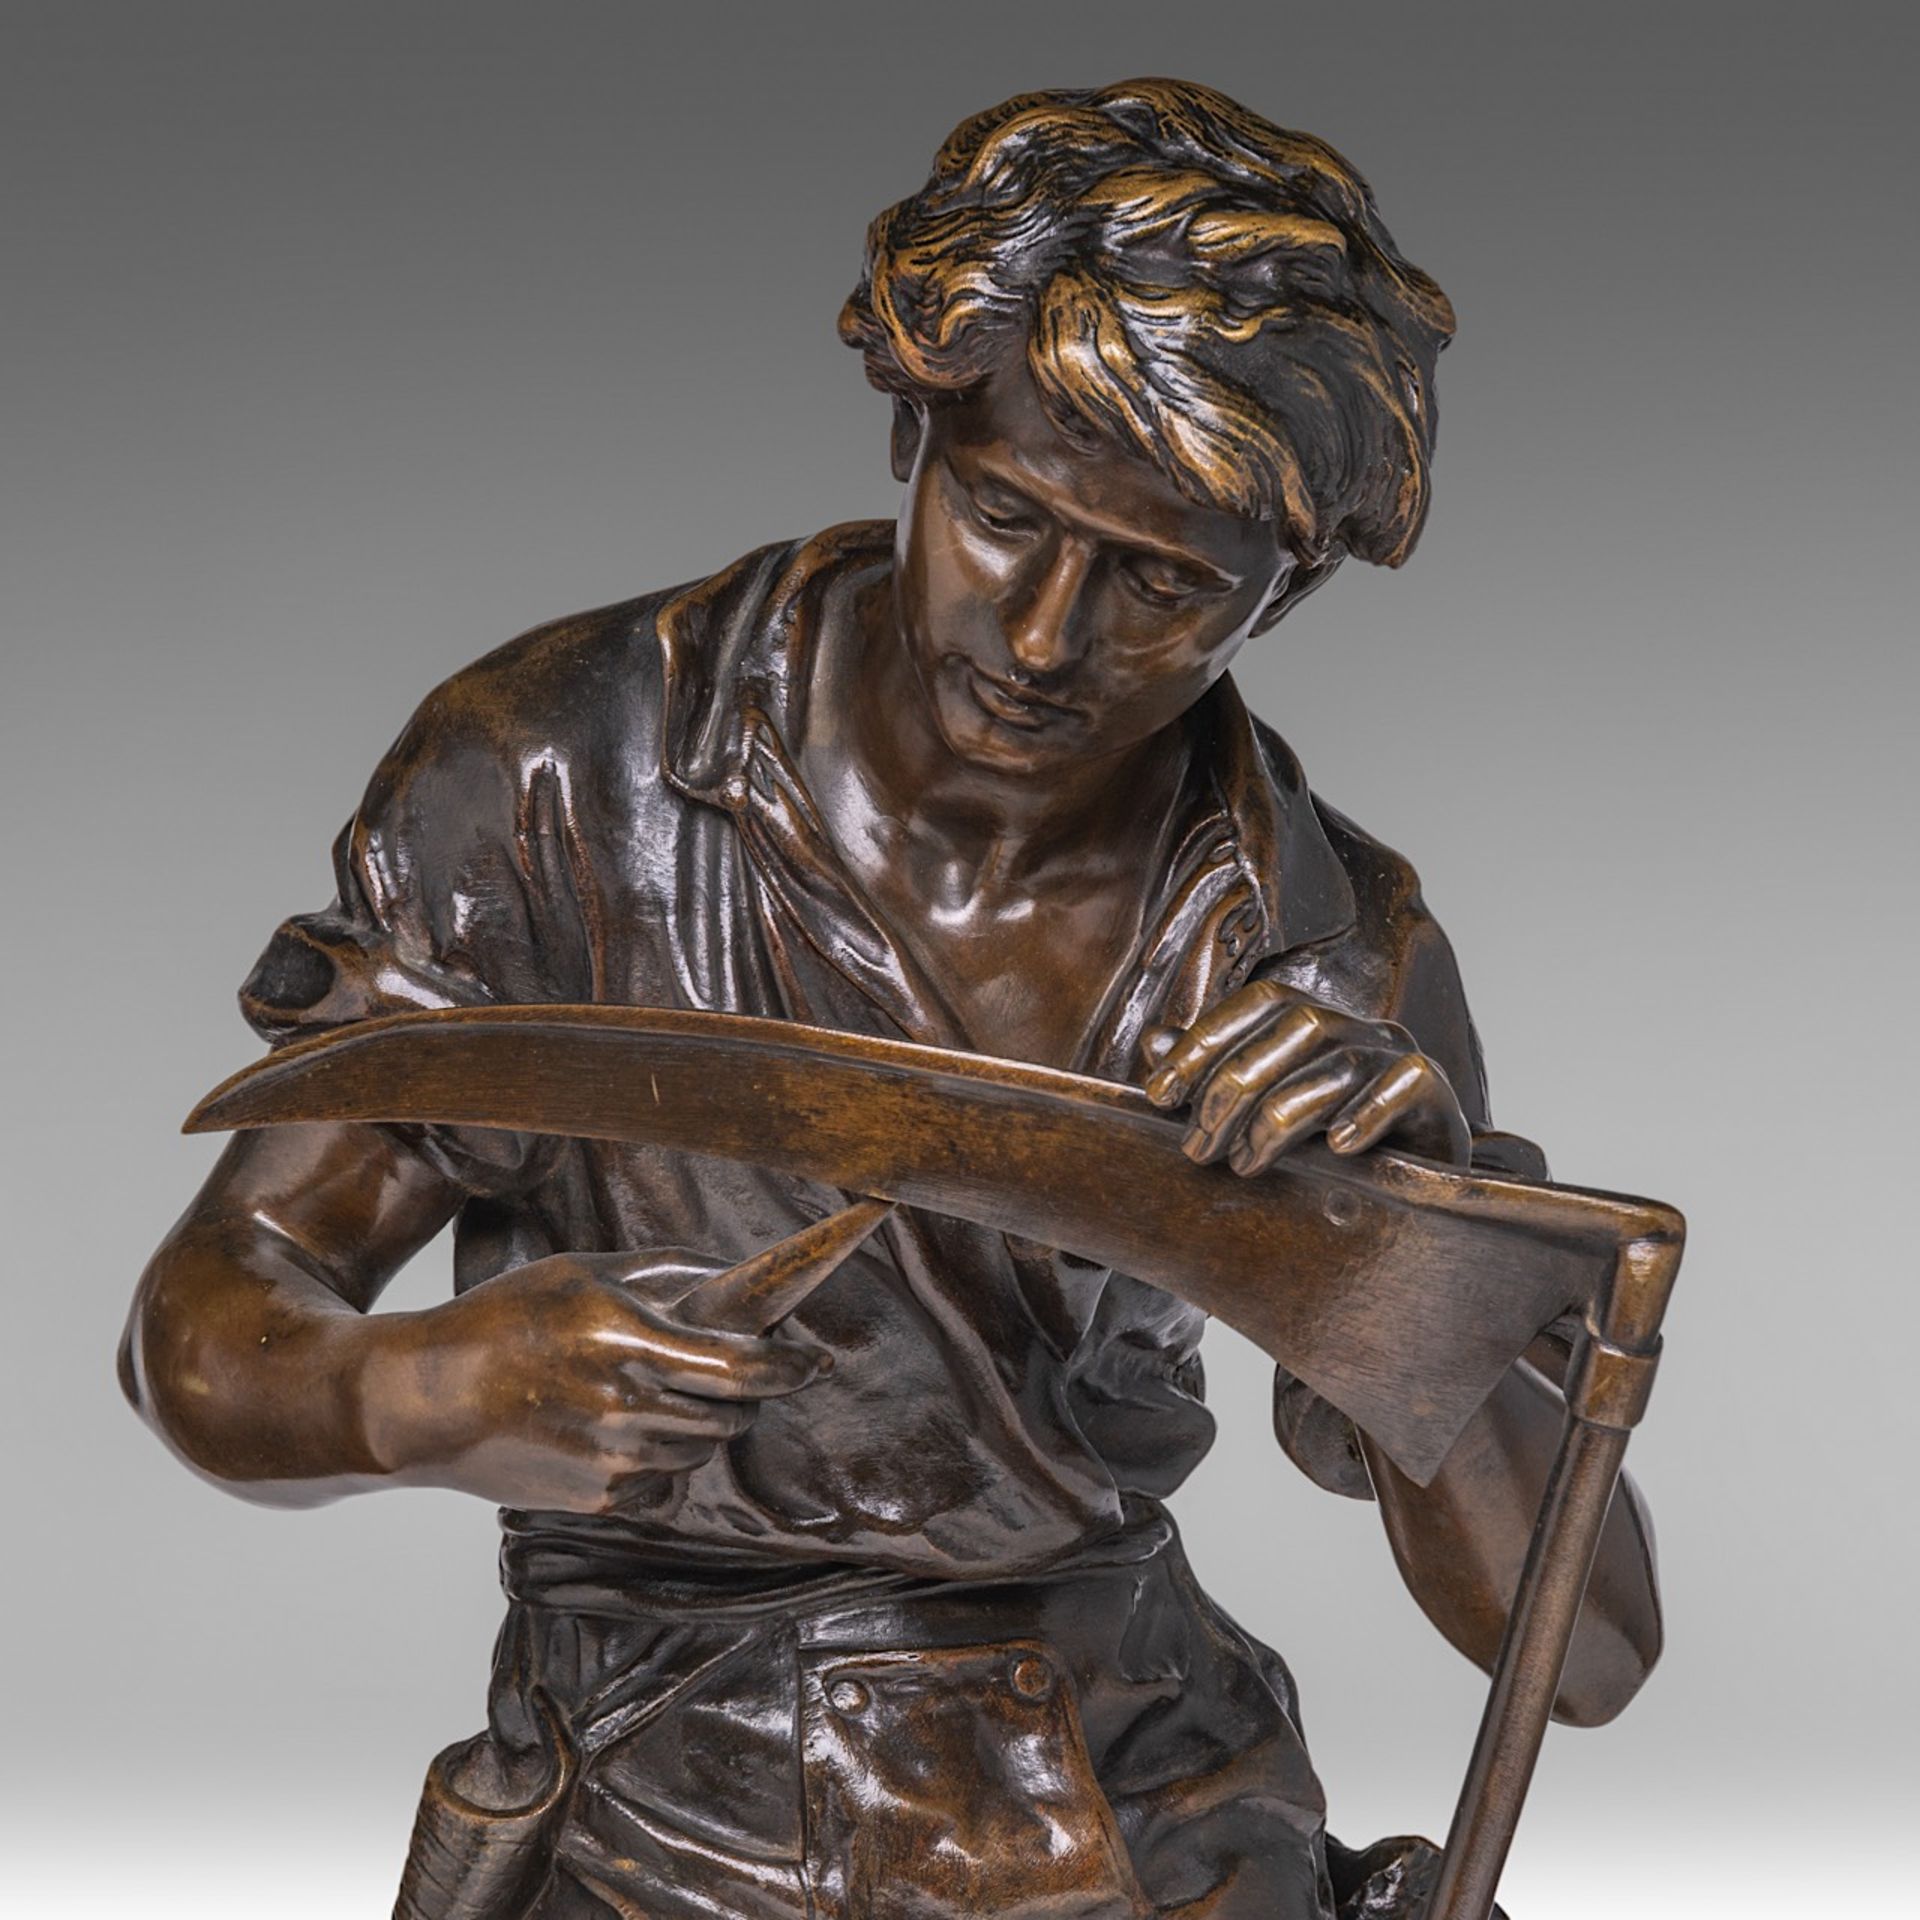 Mathurin Moreau (1822-1912), boy with scythe, patinated bronze, H 62 cm - Image 7 of 7